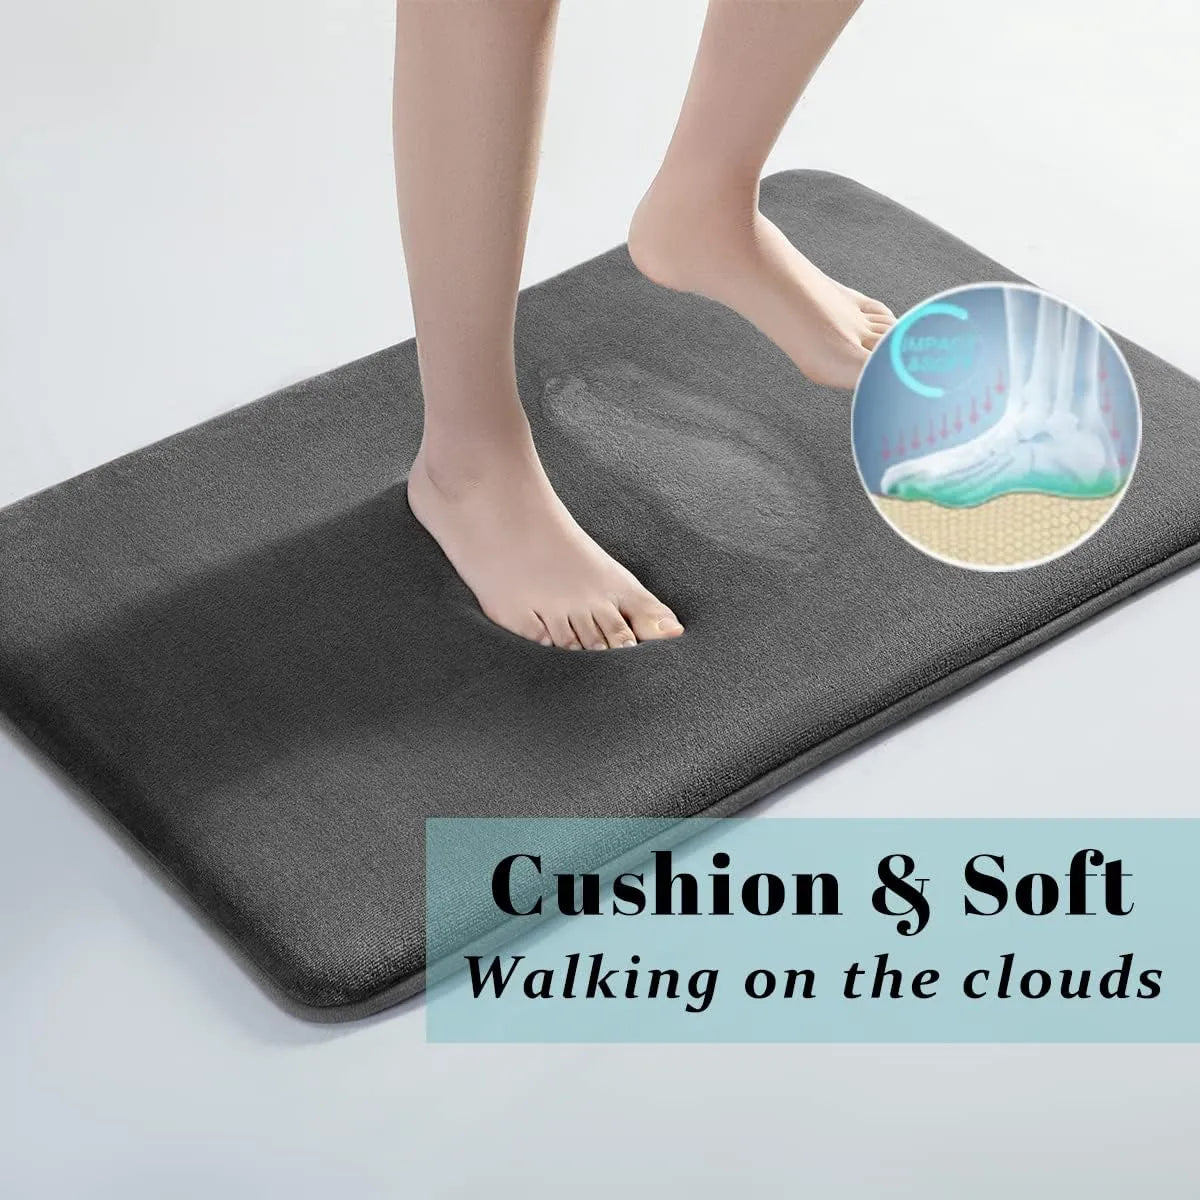 Comfortable Floor Mats: Absorbent, Anti-Slip, and Luxuriously Soft